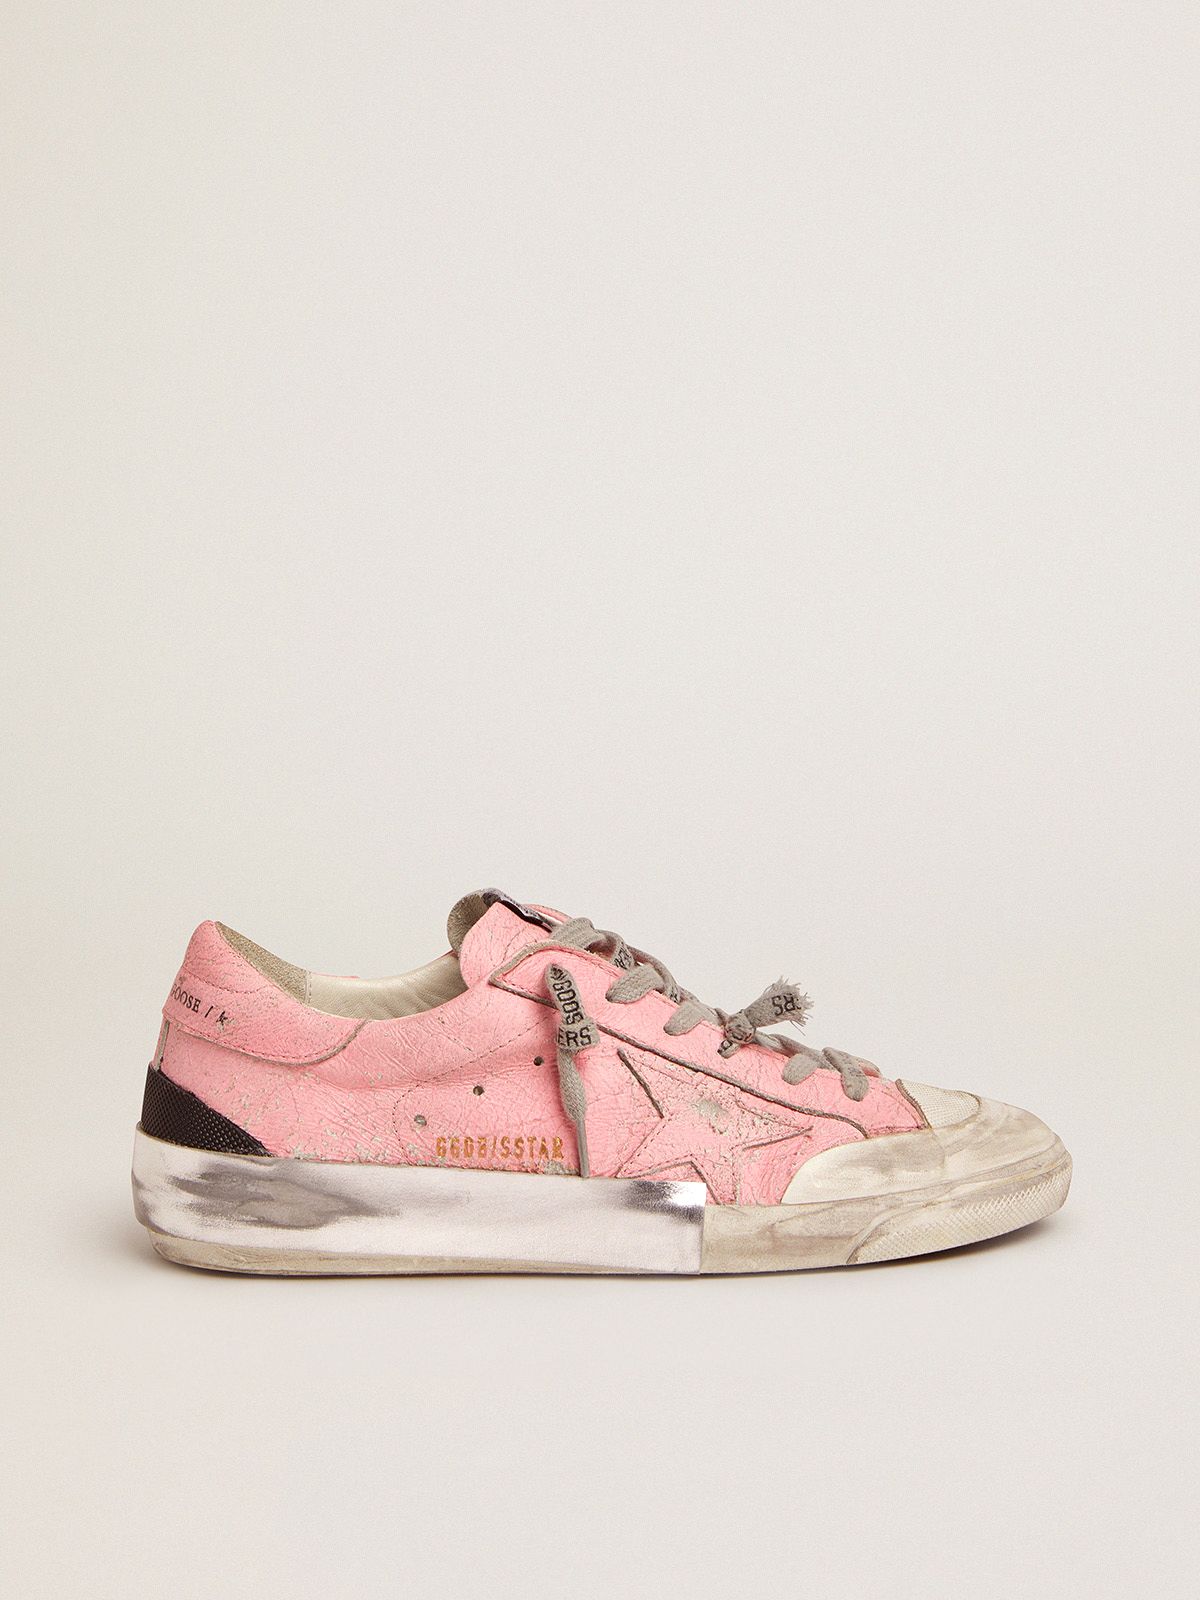 Super-Star sneakers in pink crackled leather and multi-foxing | 